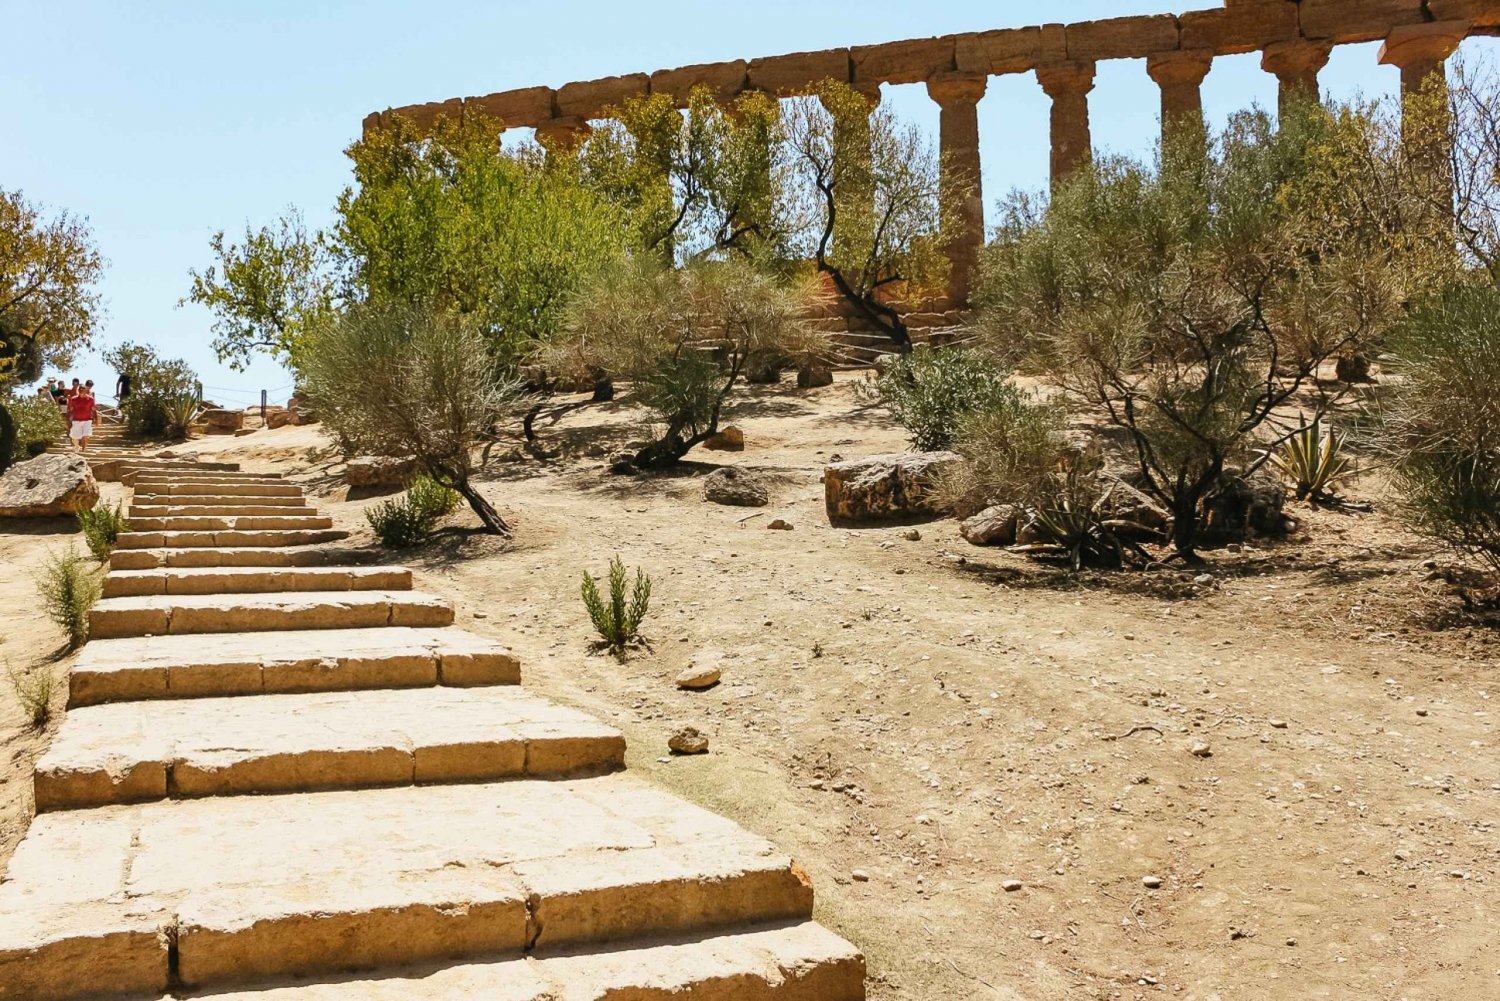 Palermo: Agrigento and the Valley of the Temples Day Tour